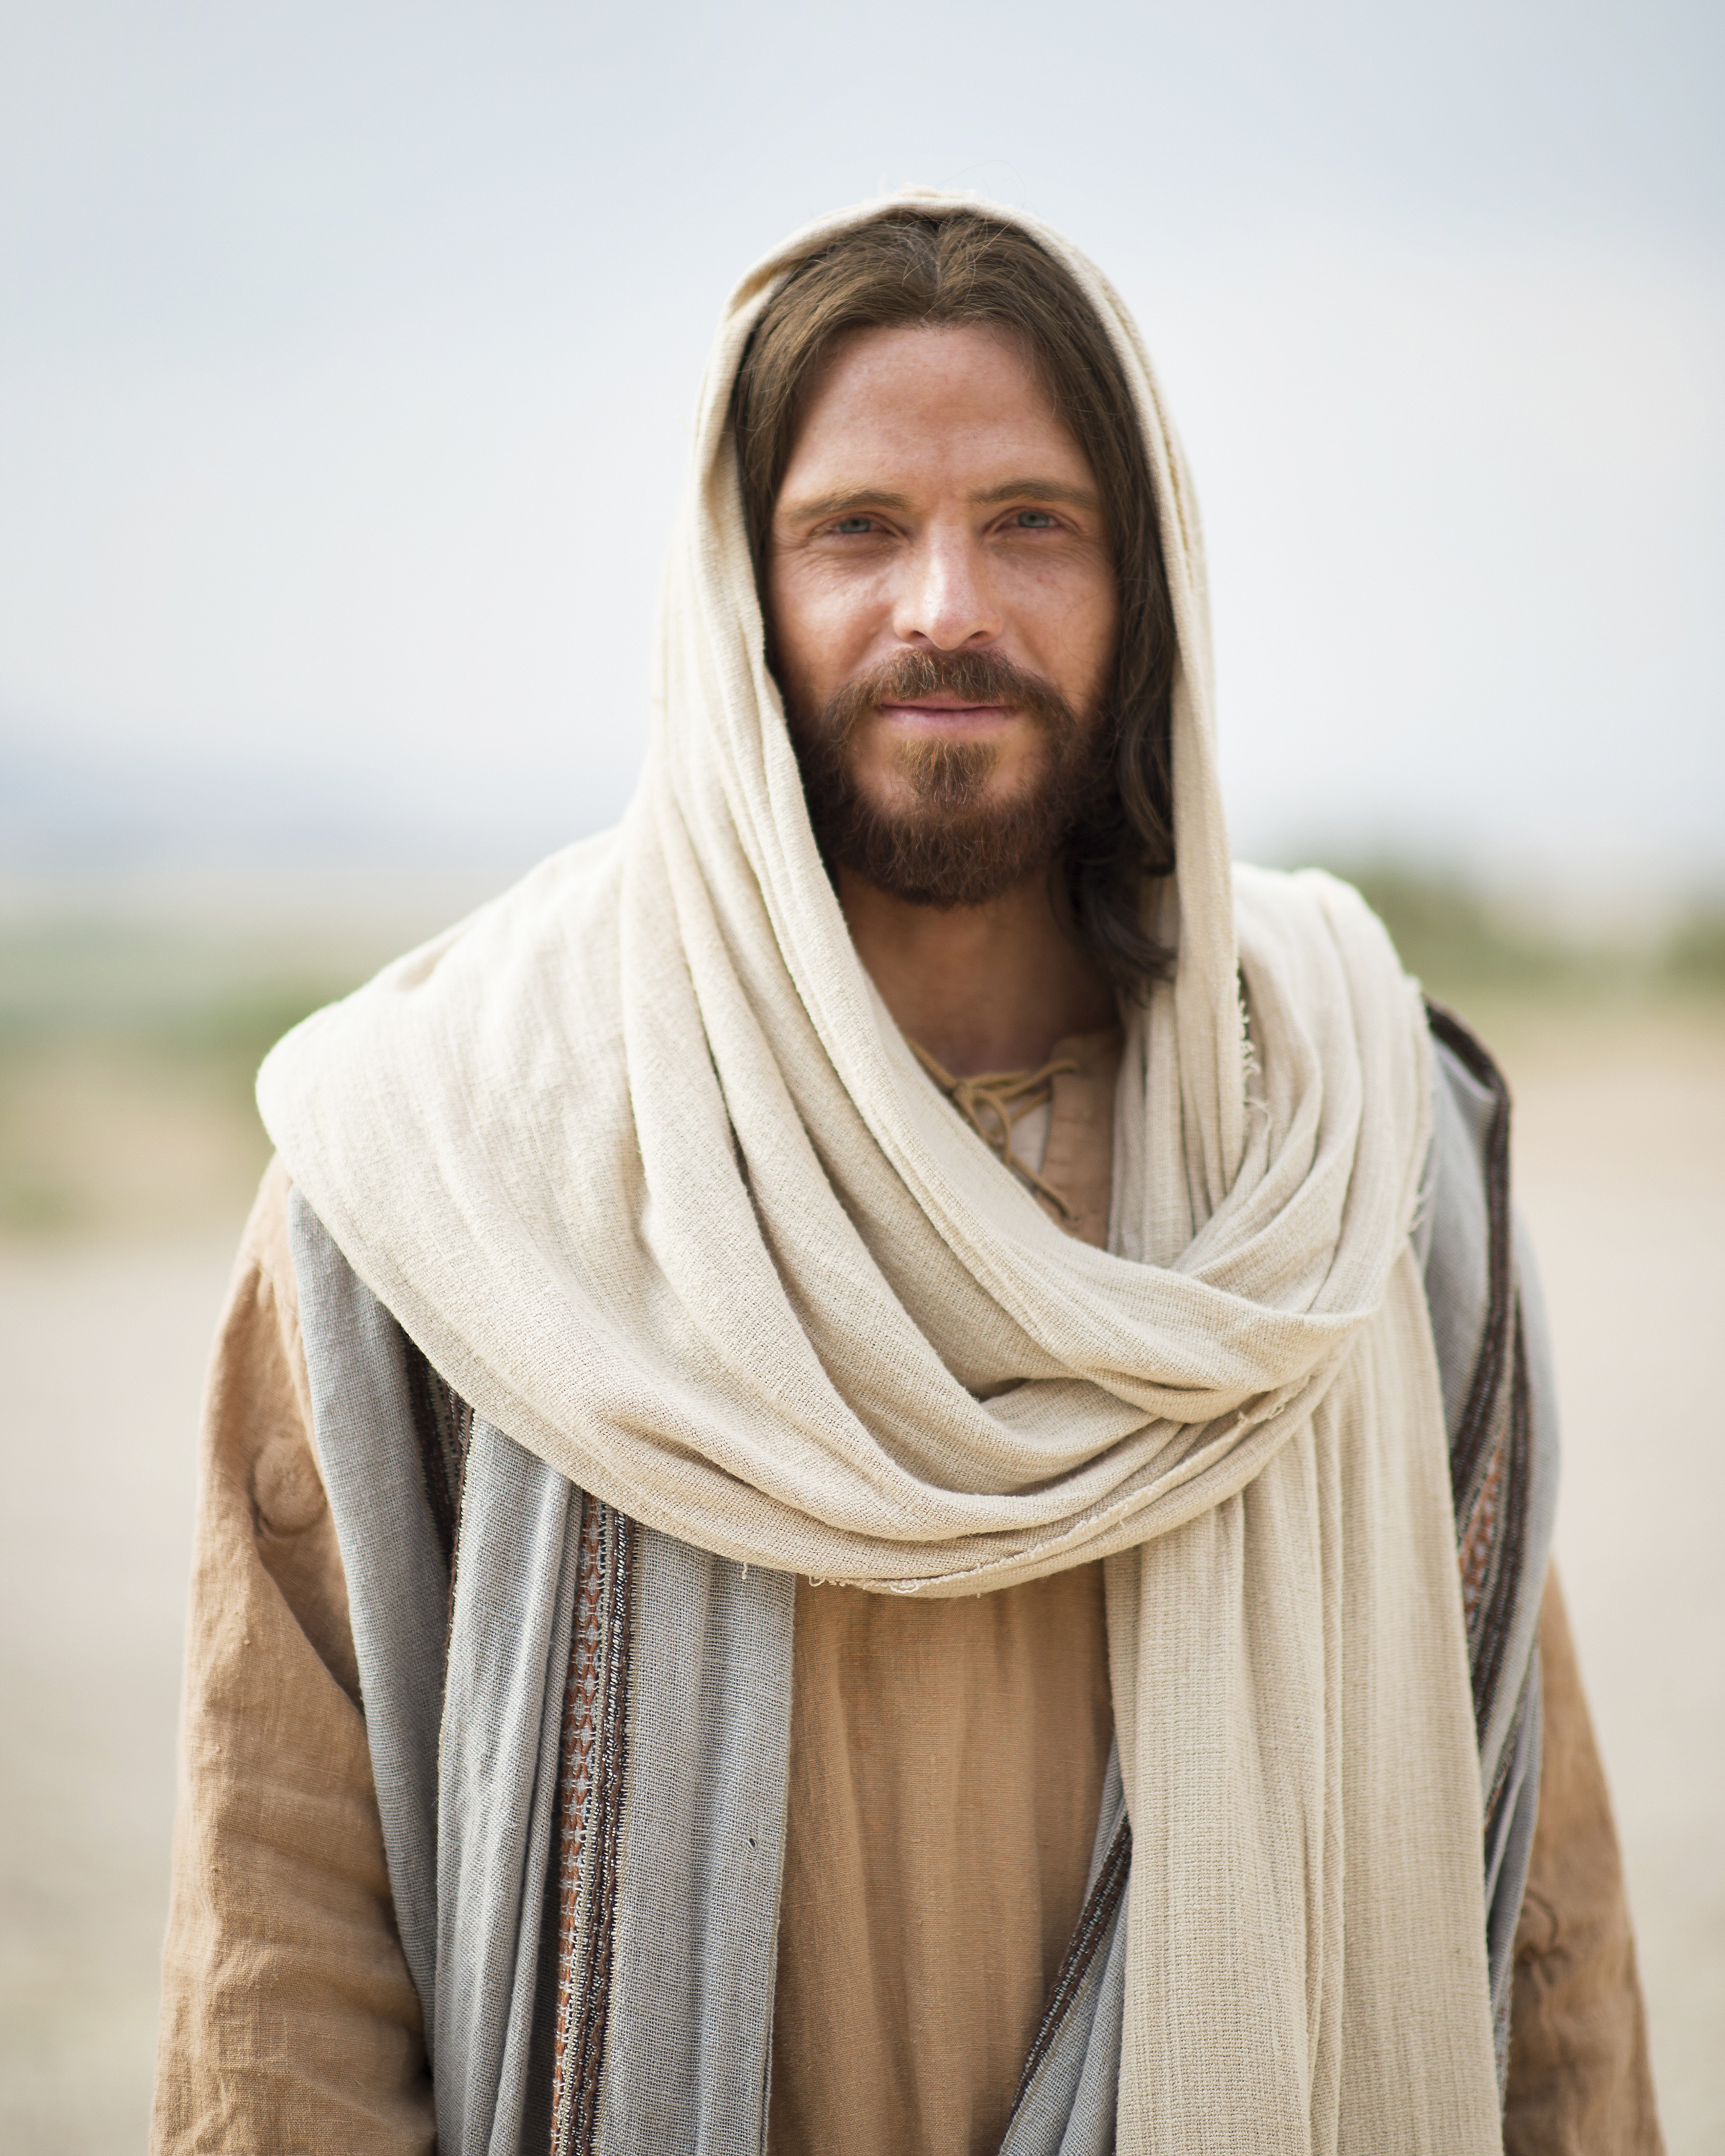 pictures-of-jesus-smiling-1138511-high-res-print.jpg